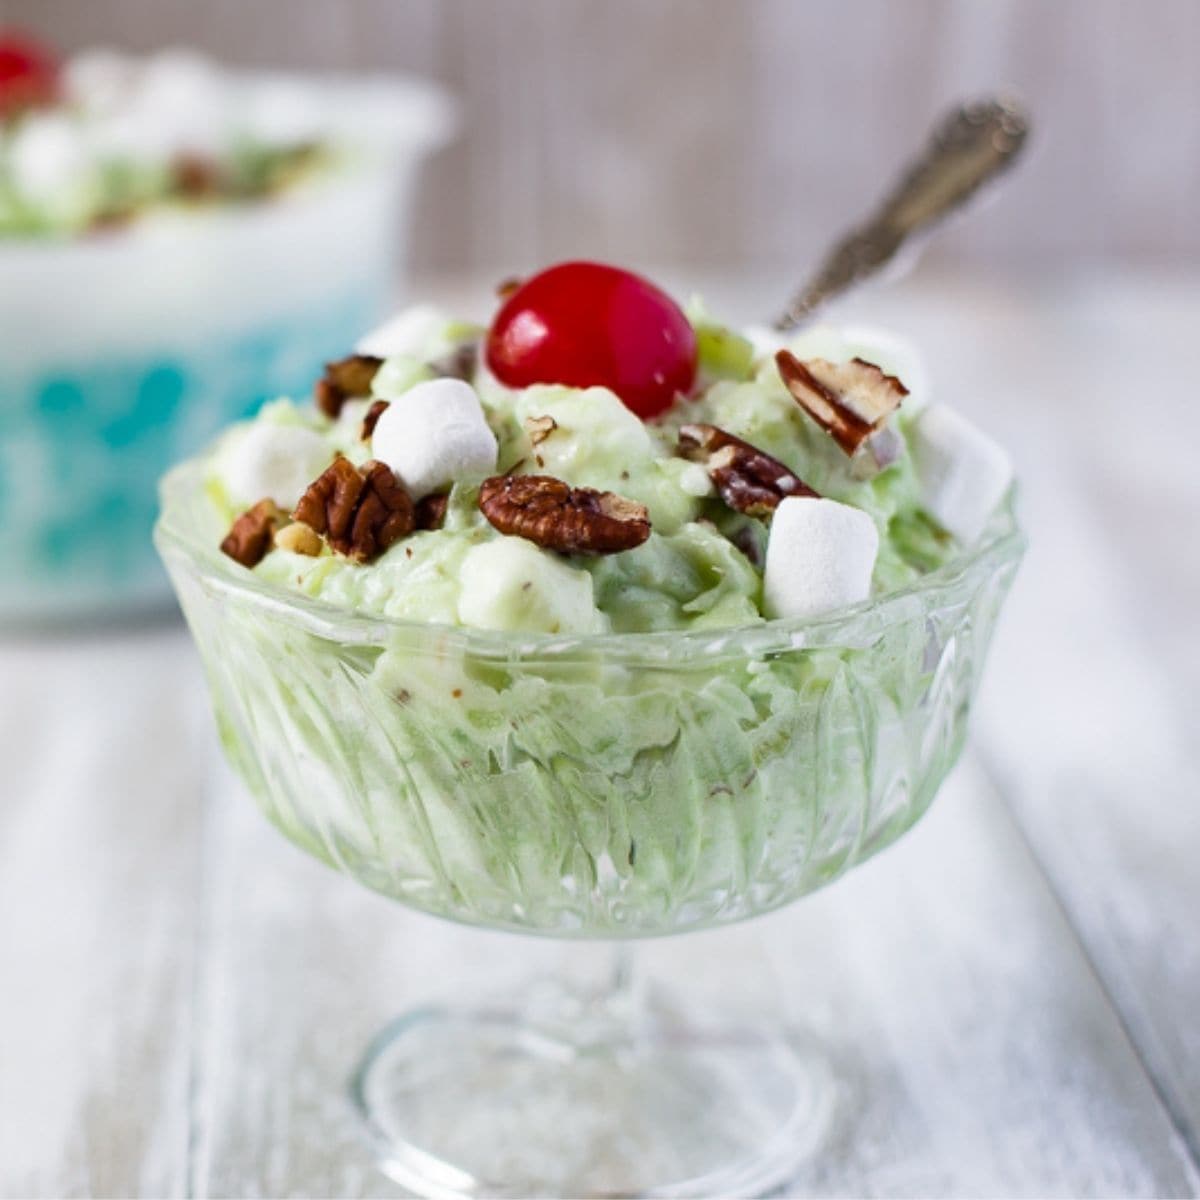 A glass dessert bowl filled with Watergate Salad.